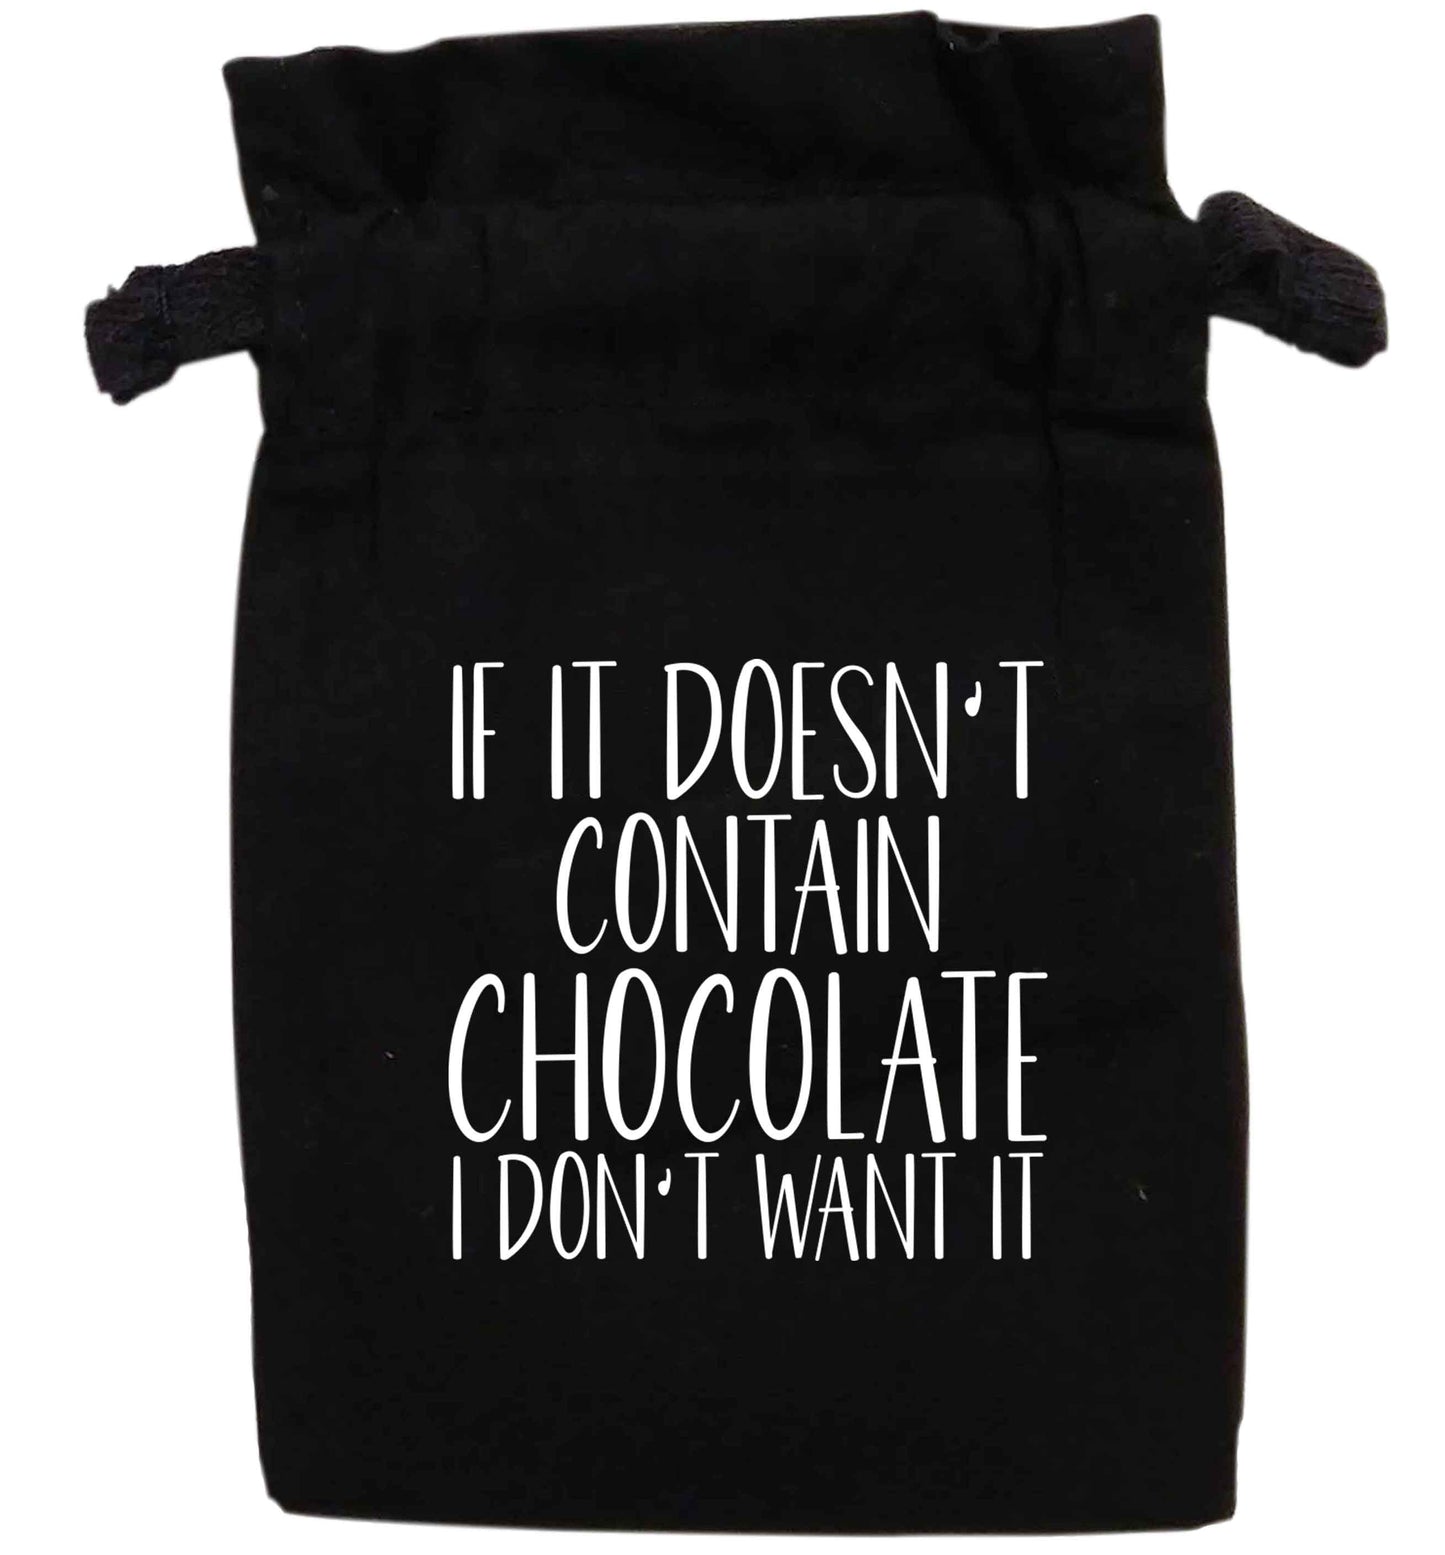 If it doesn't contain chocolate I don't want it | XS - L | Pouch / Drawstring bag / Sack | Organic Cotton | Bulk discounts available!